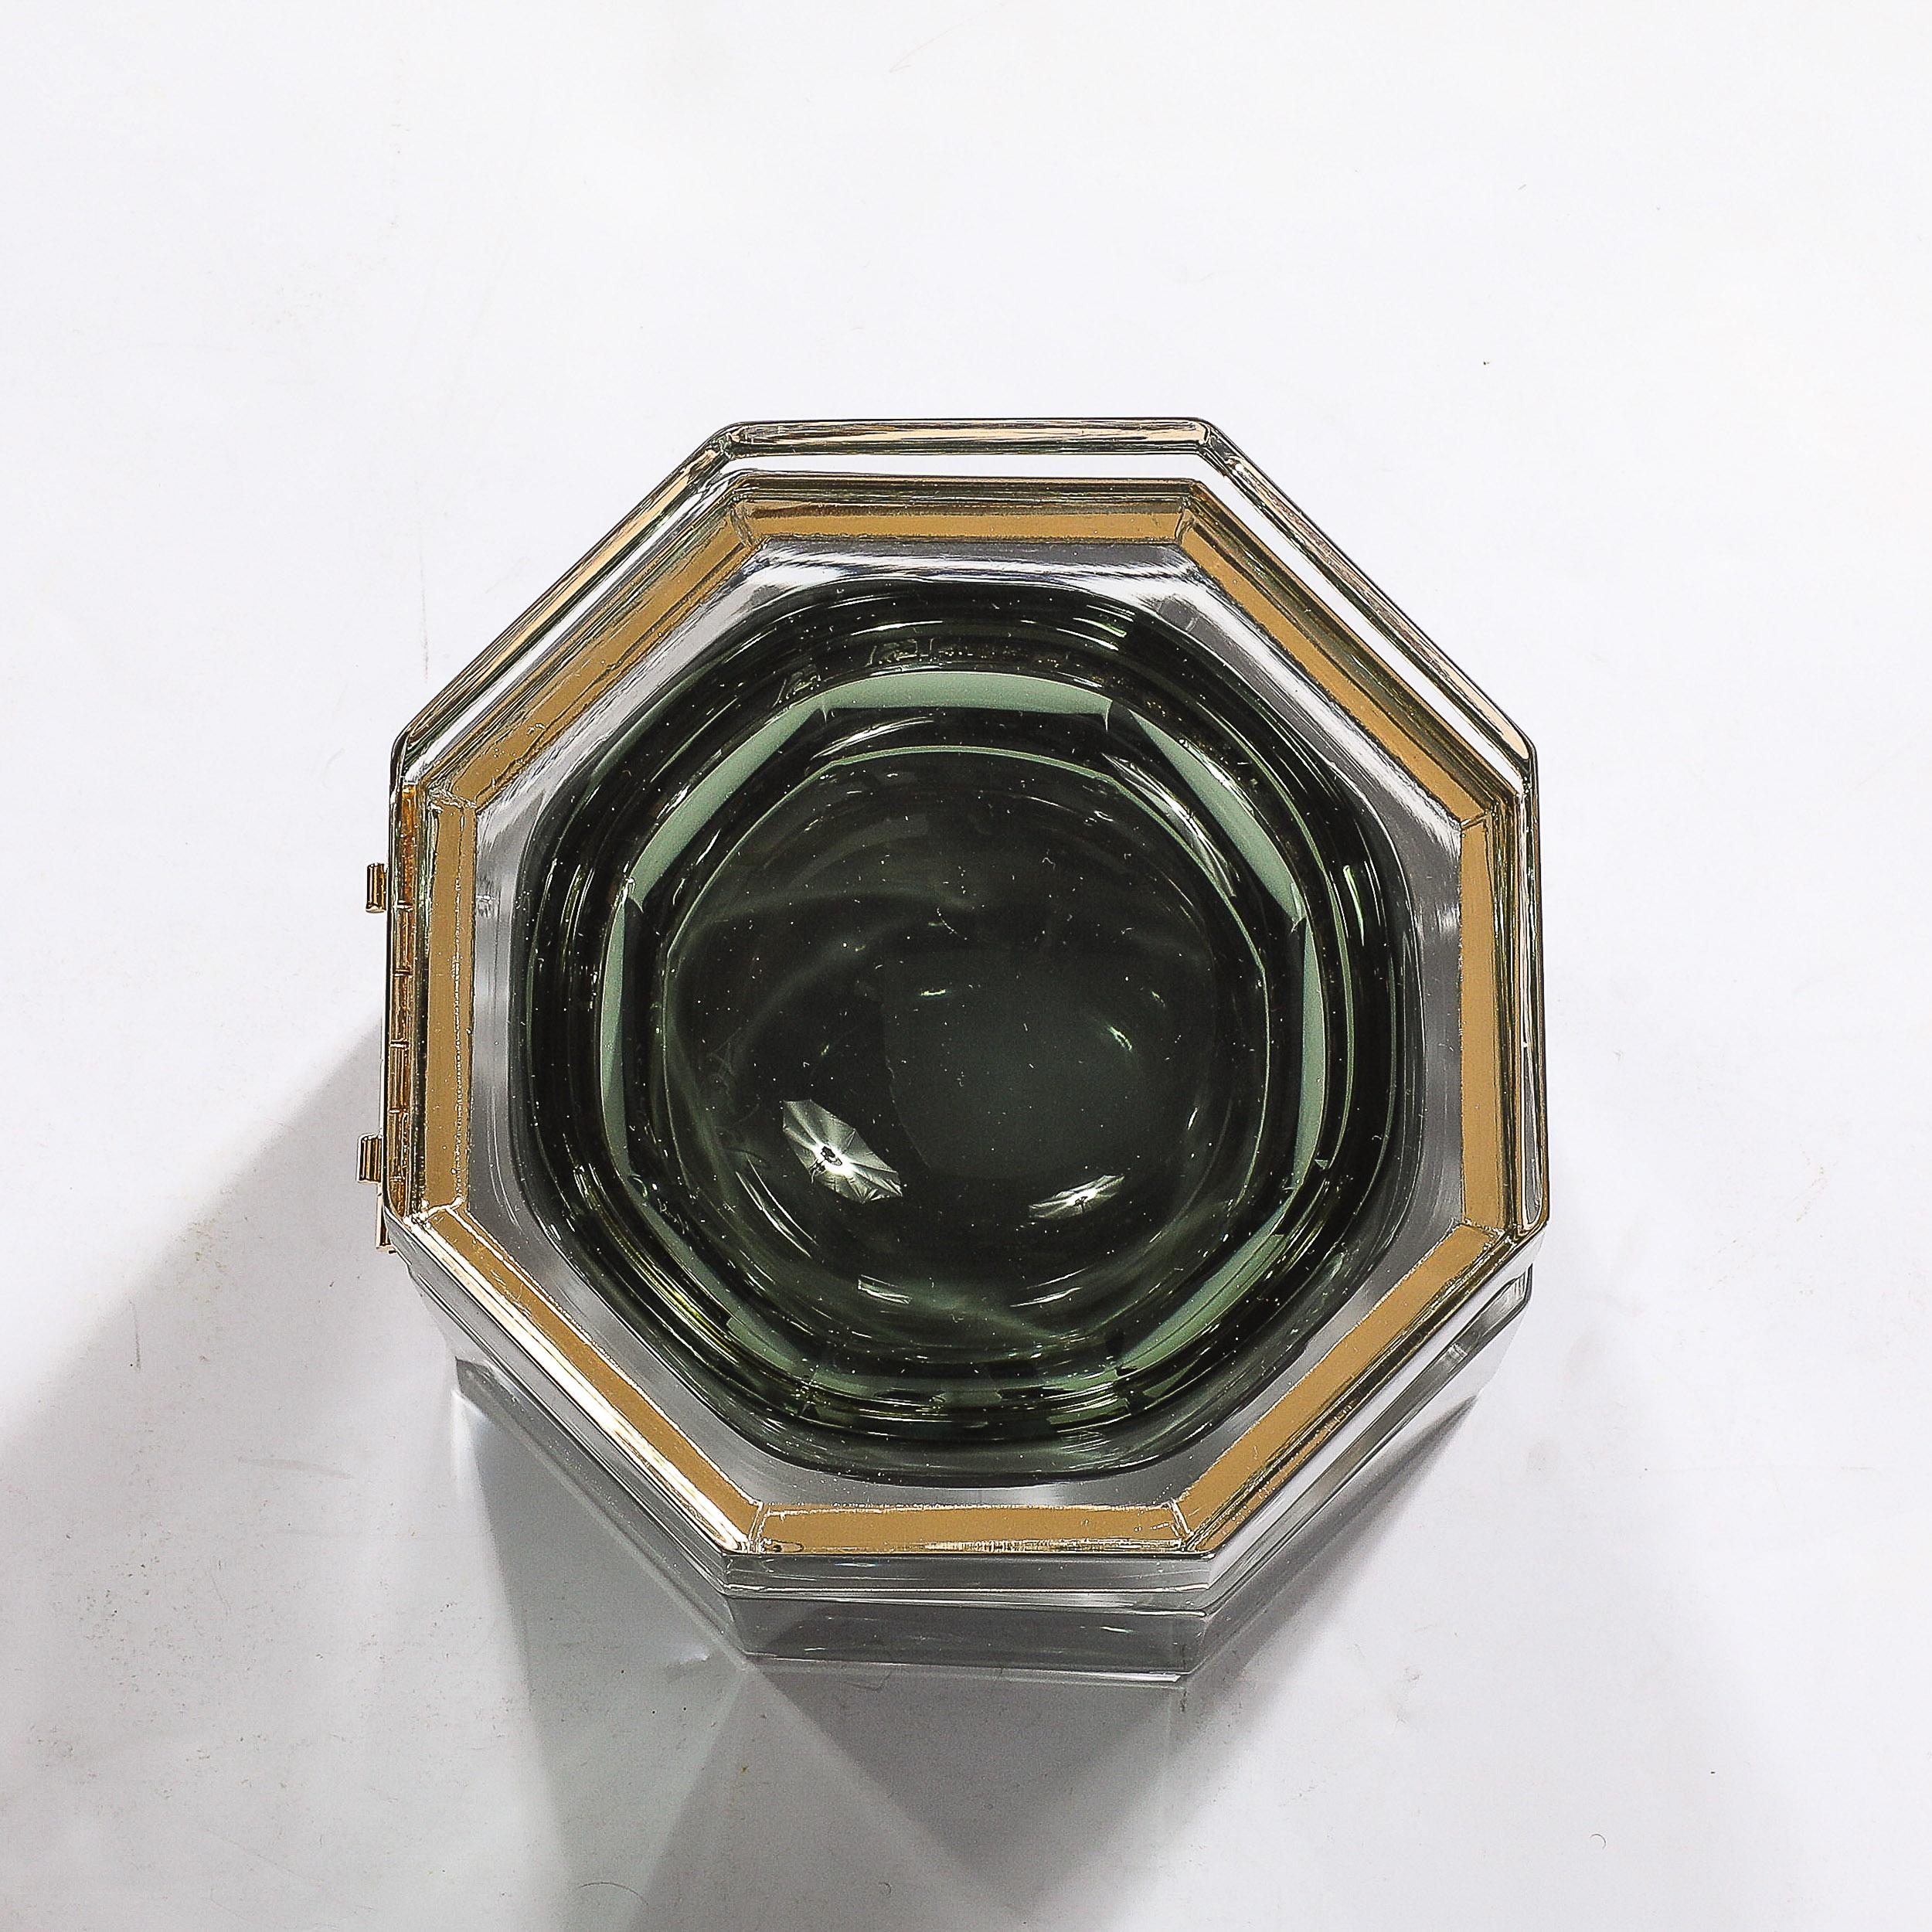 This beautifully colored and elegant Modernist Hand-Blown Murano Octagonal Glass Box in Emerald W/Brass Fittings originates from Italy during the 21st Century. Features an octagonal profile rendered in hand-blown murano glass, transparent along the